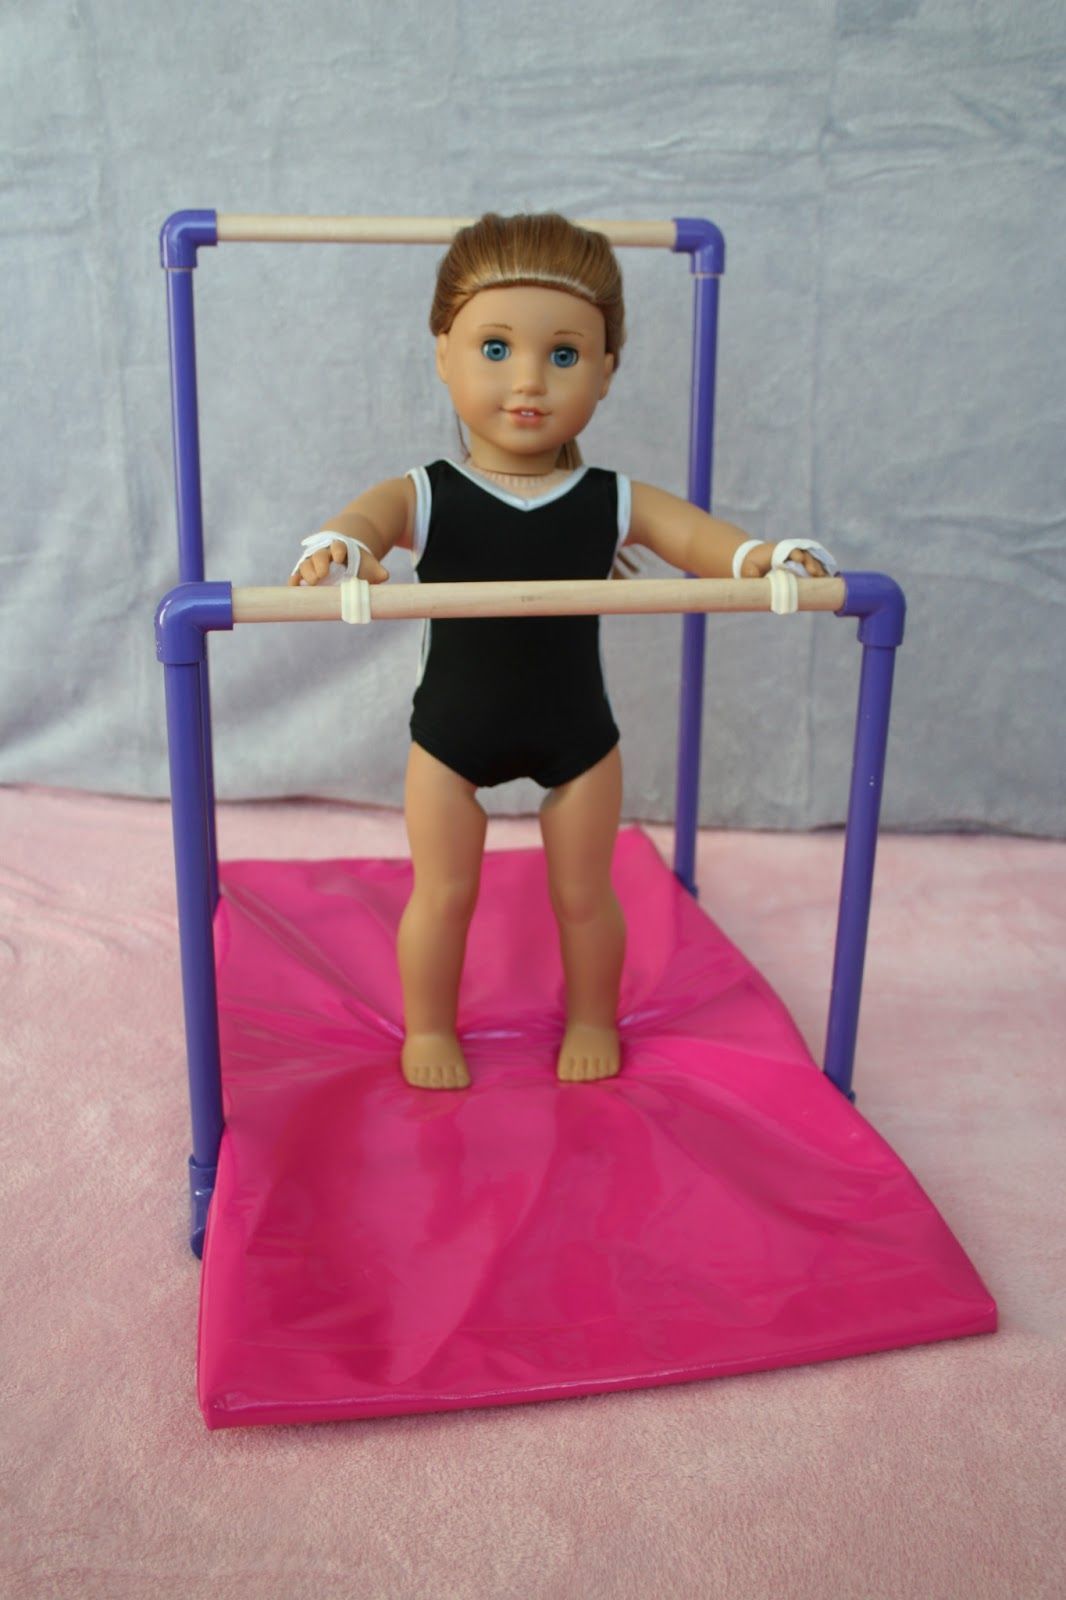 Arts and Crafts for your American Girl Doll: Uneven Bars for American Girl doll